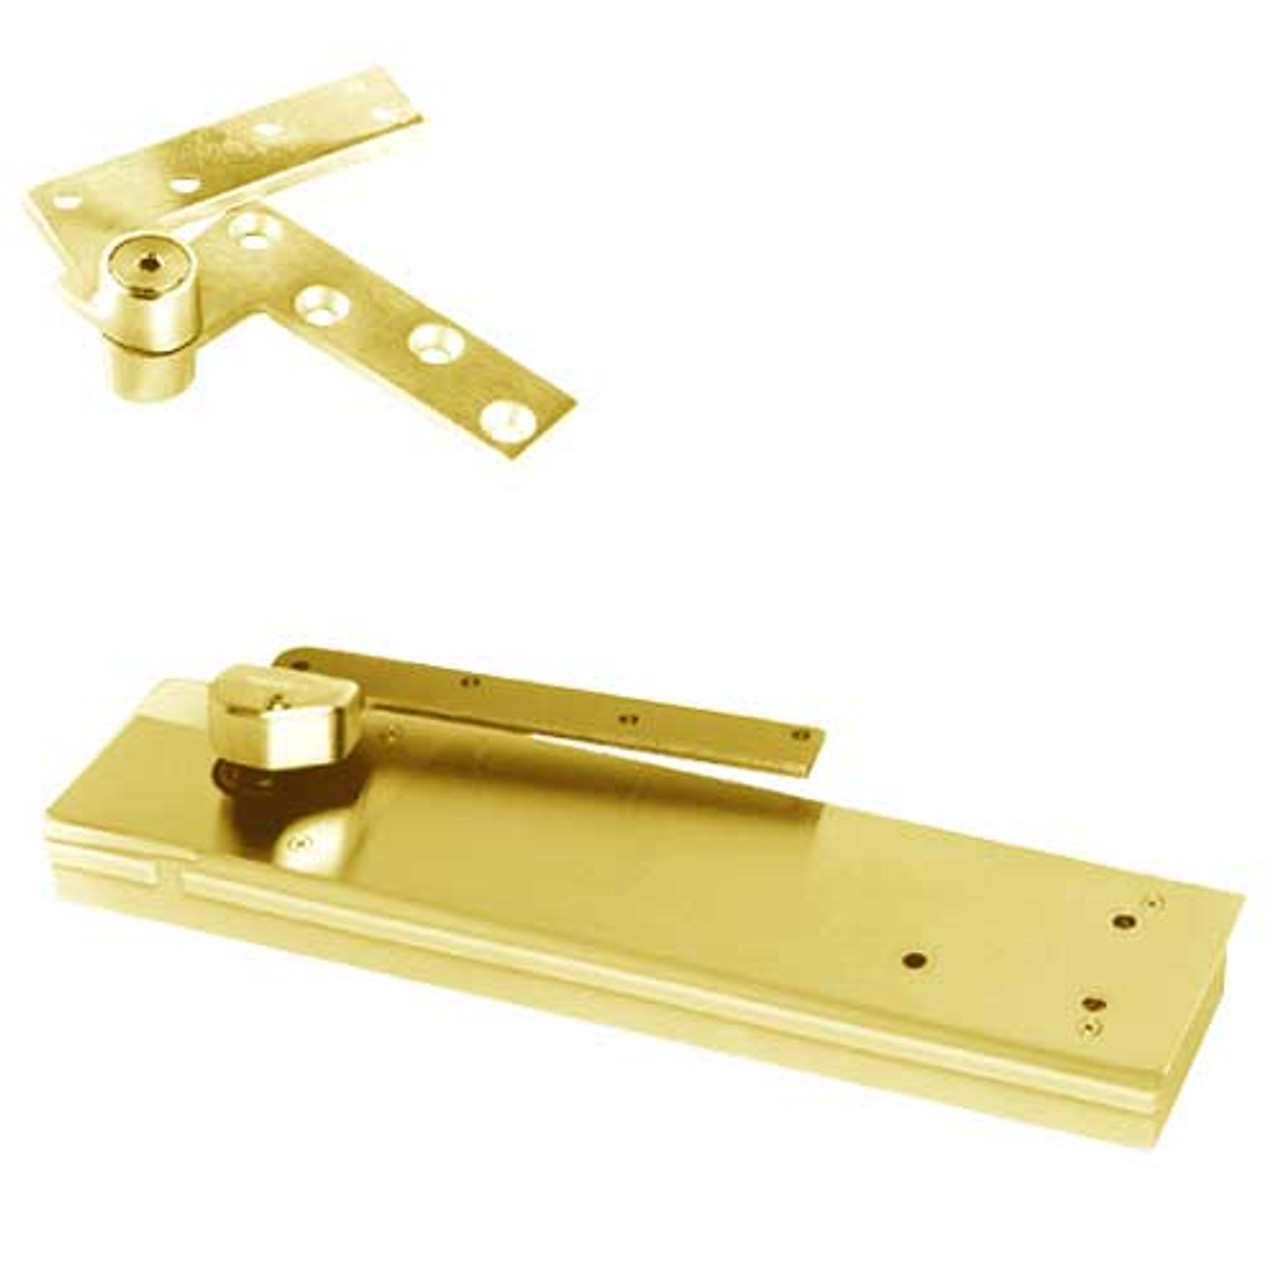 5103ABC105-1-1/2OS-SC-LH-605 Rixson 51 Series 1-1/2" Offset Hung Shallow Depth Floor Closers in Bright Brass Finish